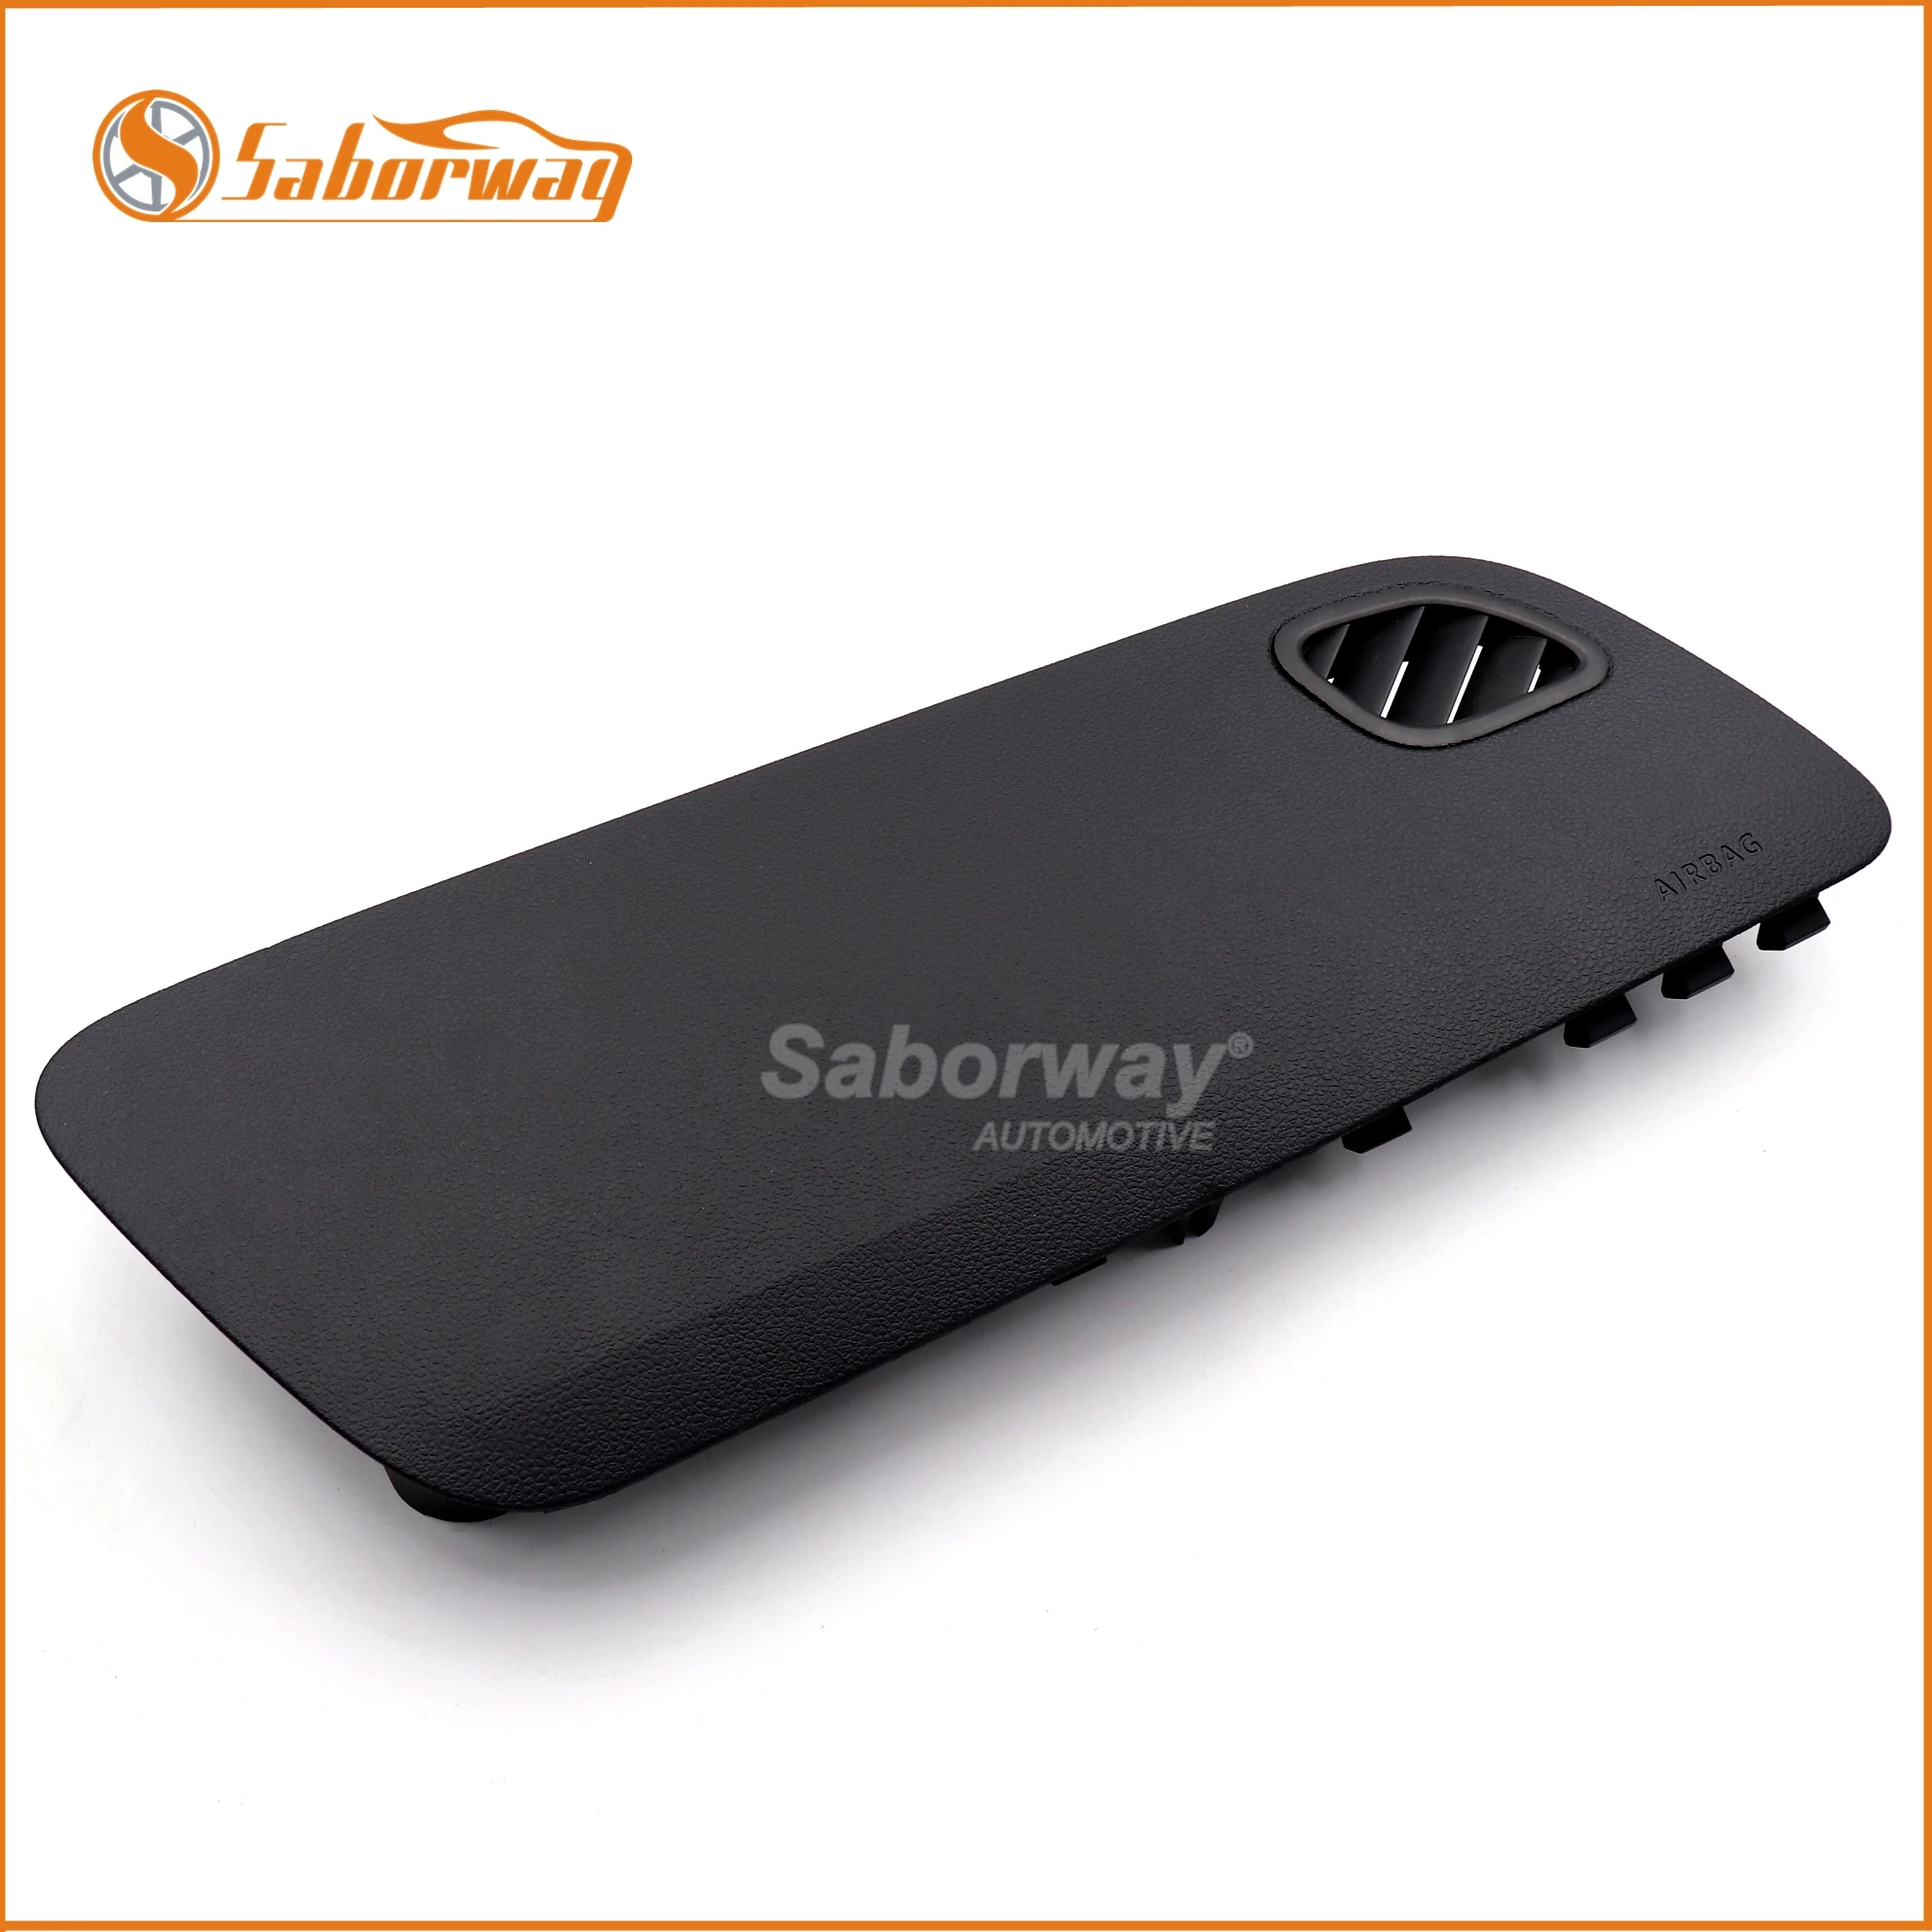 Saborway Black Instrument Panel Cover Dashboard Cover Passenger Side Cover For New Polo 2011 2012 2013 2014 2015 6R0 880 261 A